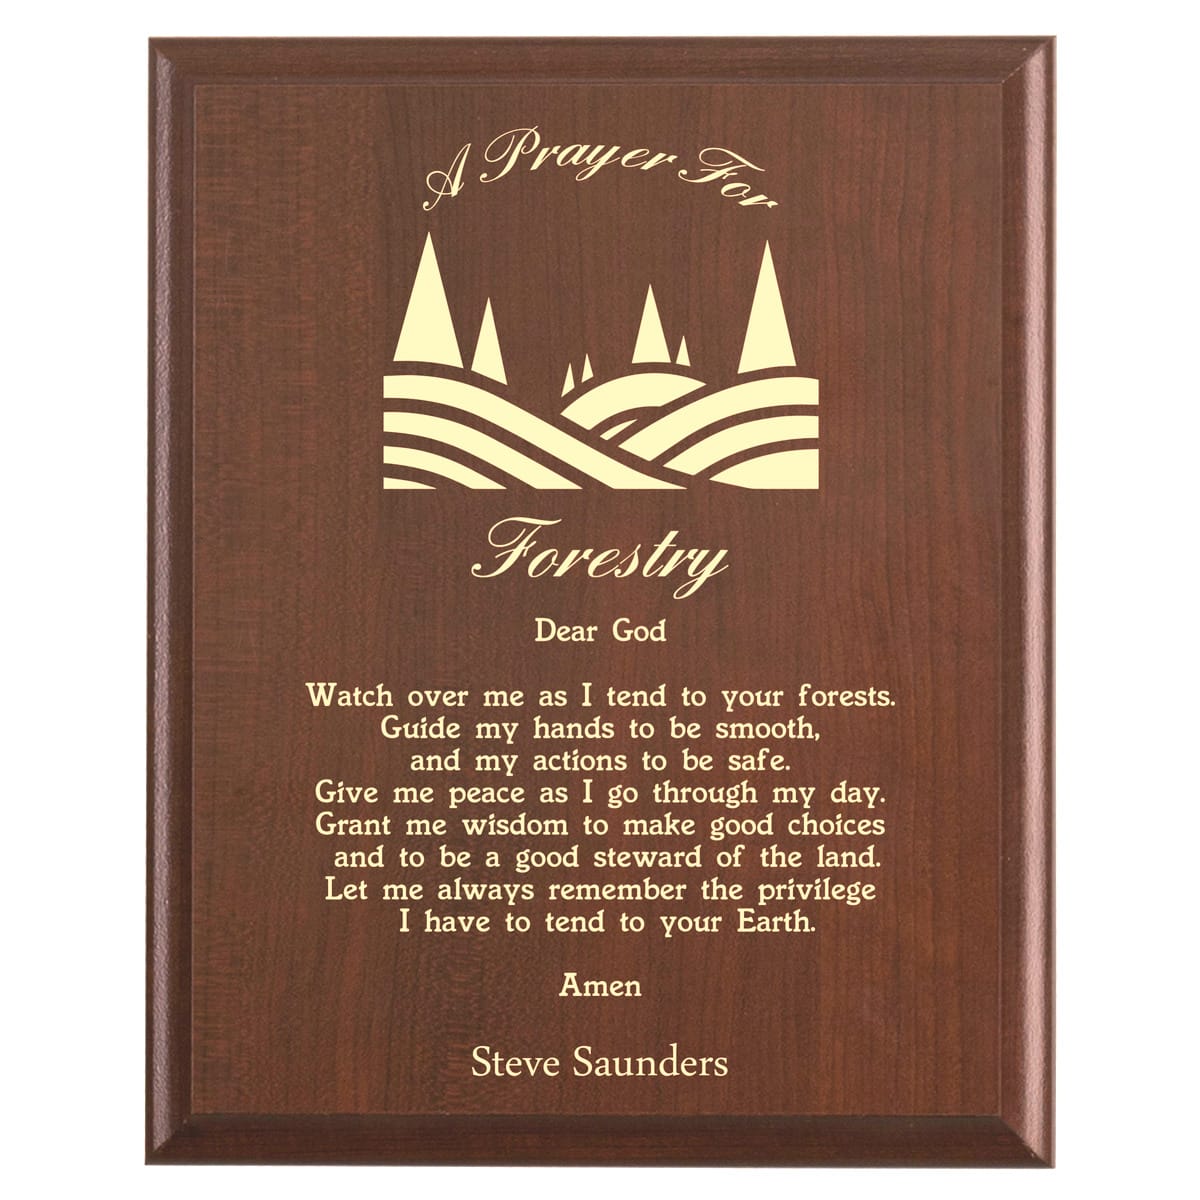 Plaque photo: Forestry Prayer Plaque design with free personalization. Wood style finish with customized text.